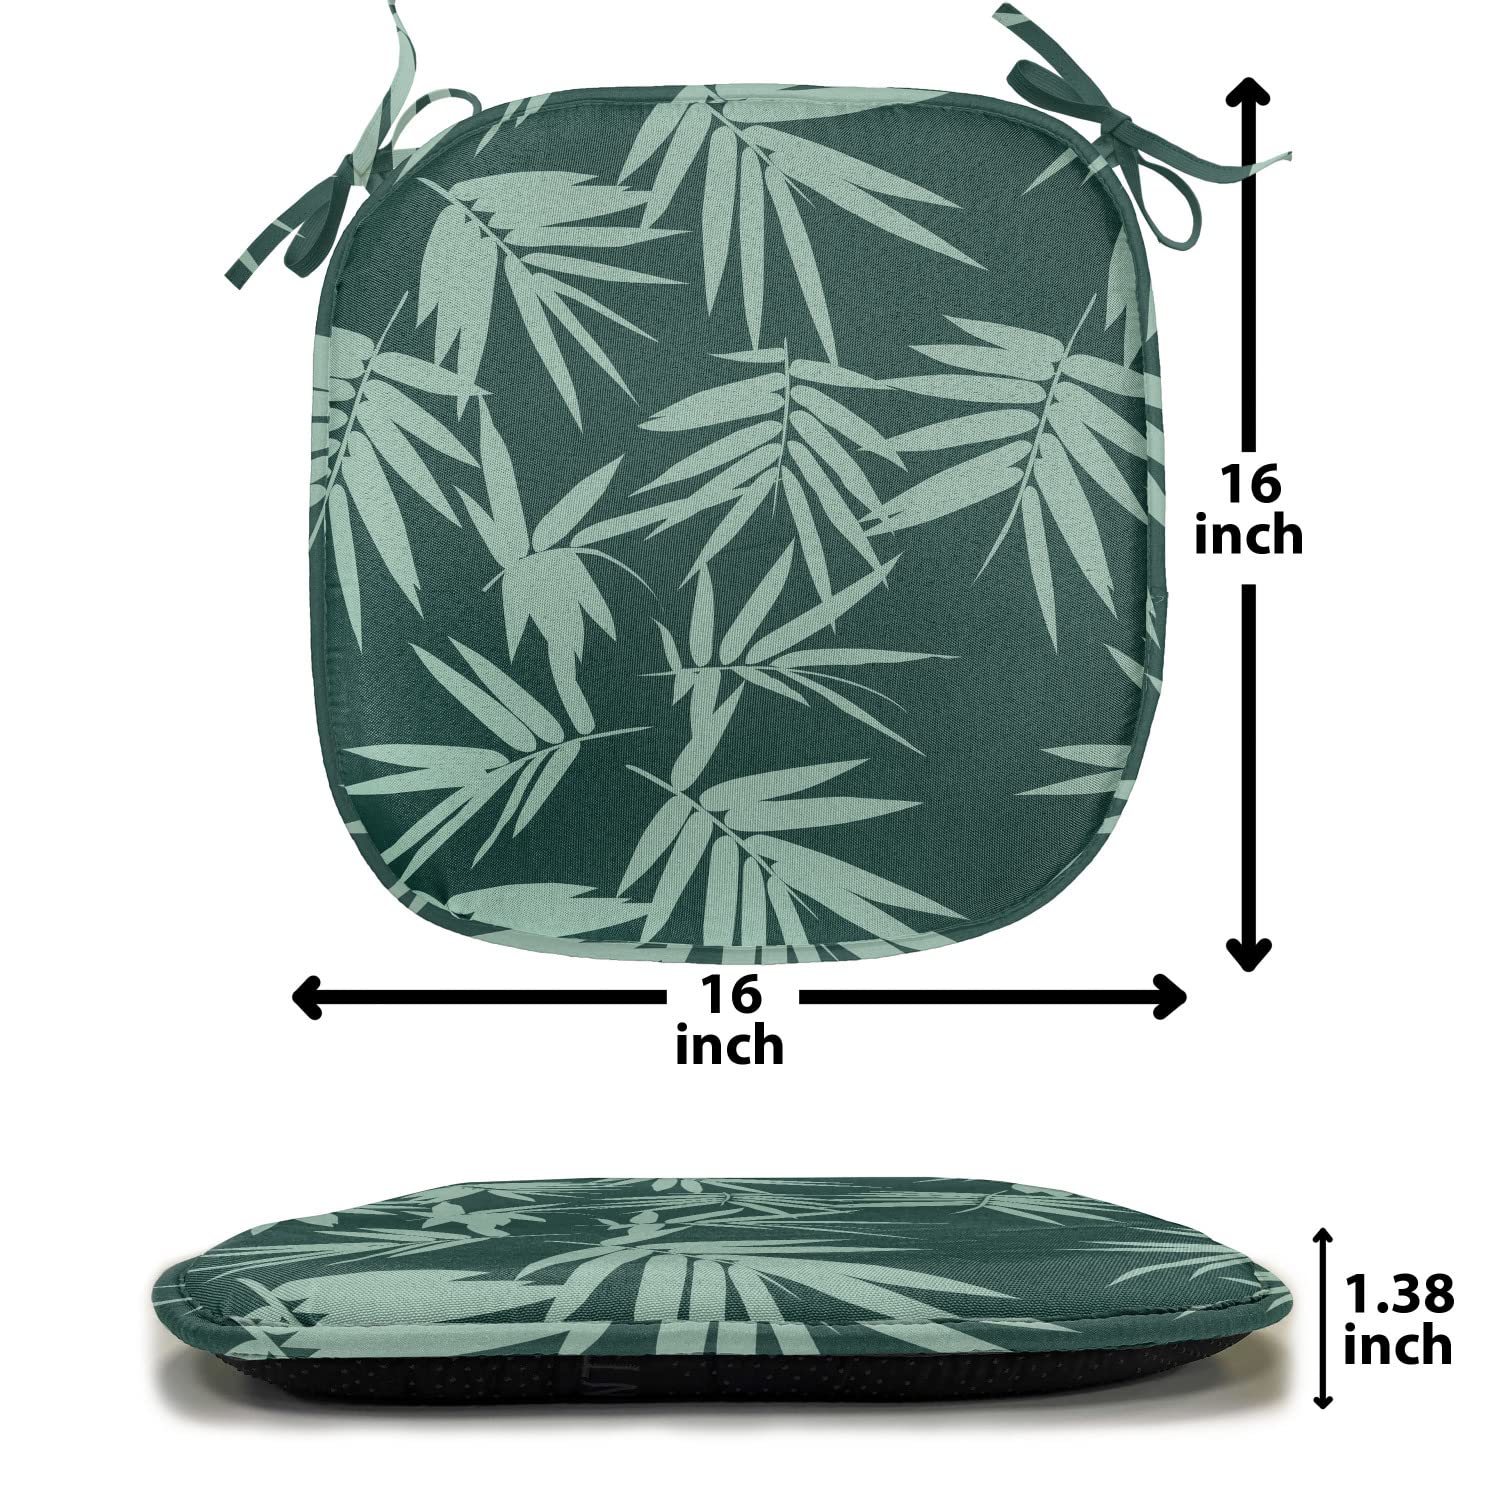 Lunarable Green Oriental Chair Seating Cushion Set of 2, Garden Art Scattered Silhouettes of Leaf Ornament Nature Themed, Anti-Slip Seat Padding for Kitchen & Patio, 16"x16", Almond Green and Green